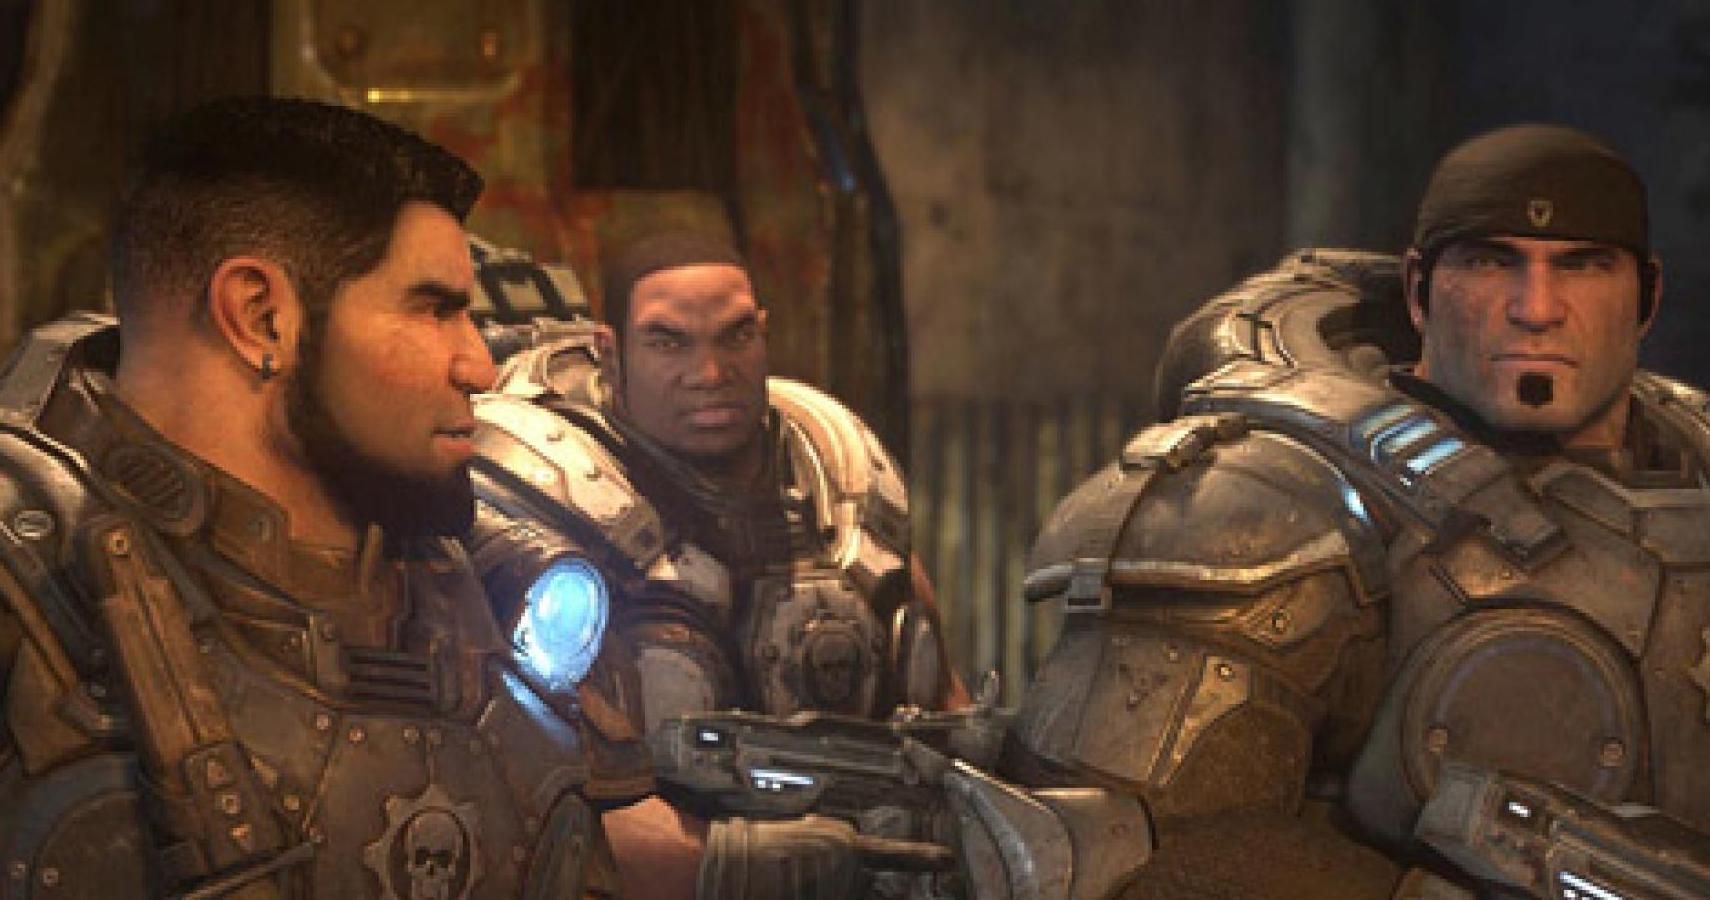 gears of war games ranked